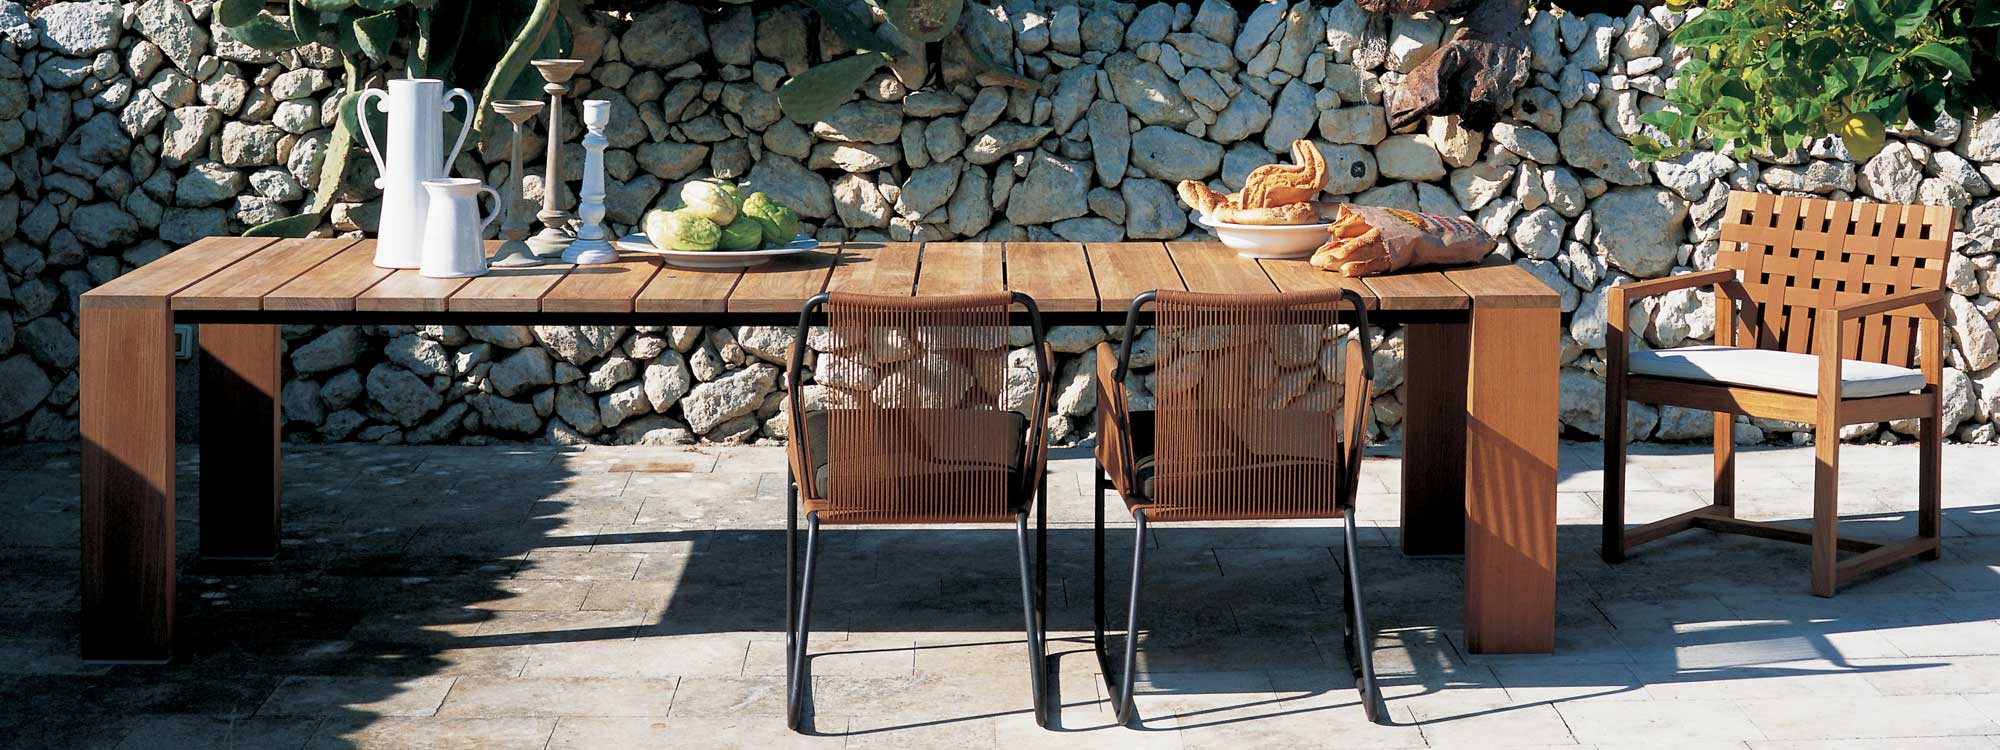 Image of RODA Pier teak table which has bold architectural design, shown together with Harp & Network garden chairs on sunny Italian terrace